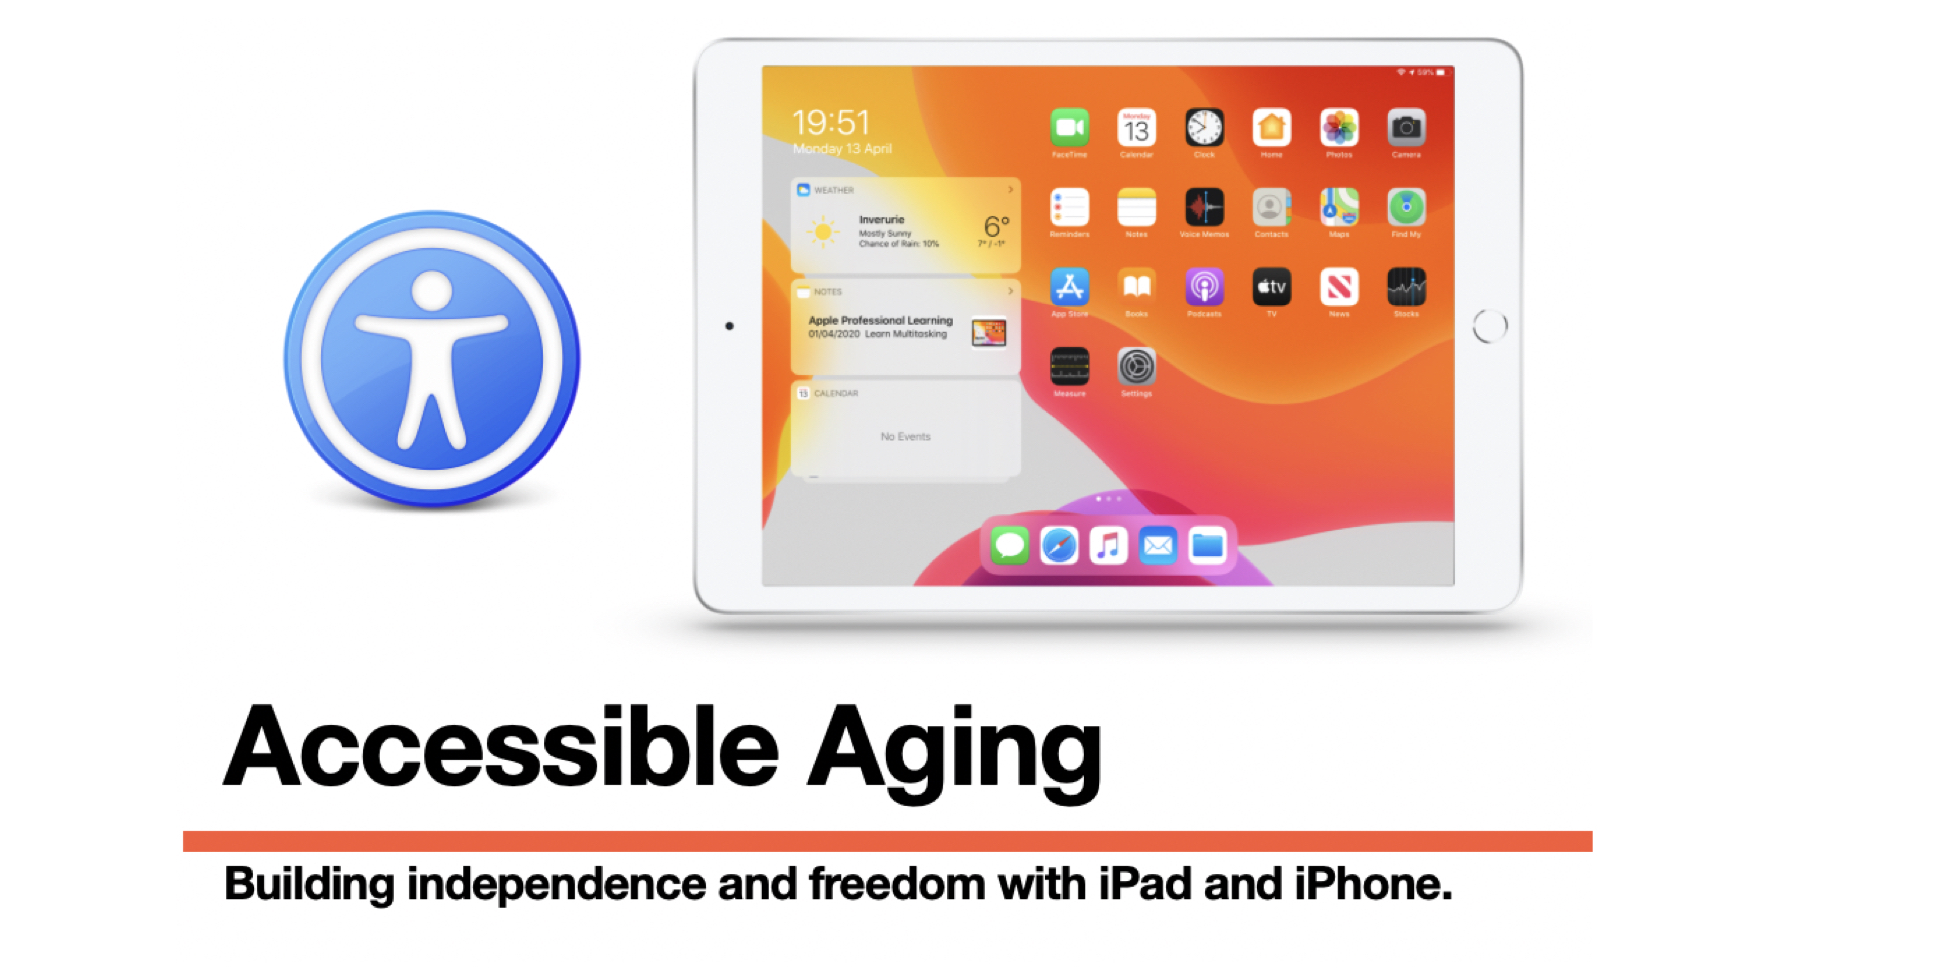 Book Cover with iPad and Accessibility symbol. Accessible Aging: Building independence and freedom with iPad and iPhone.